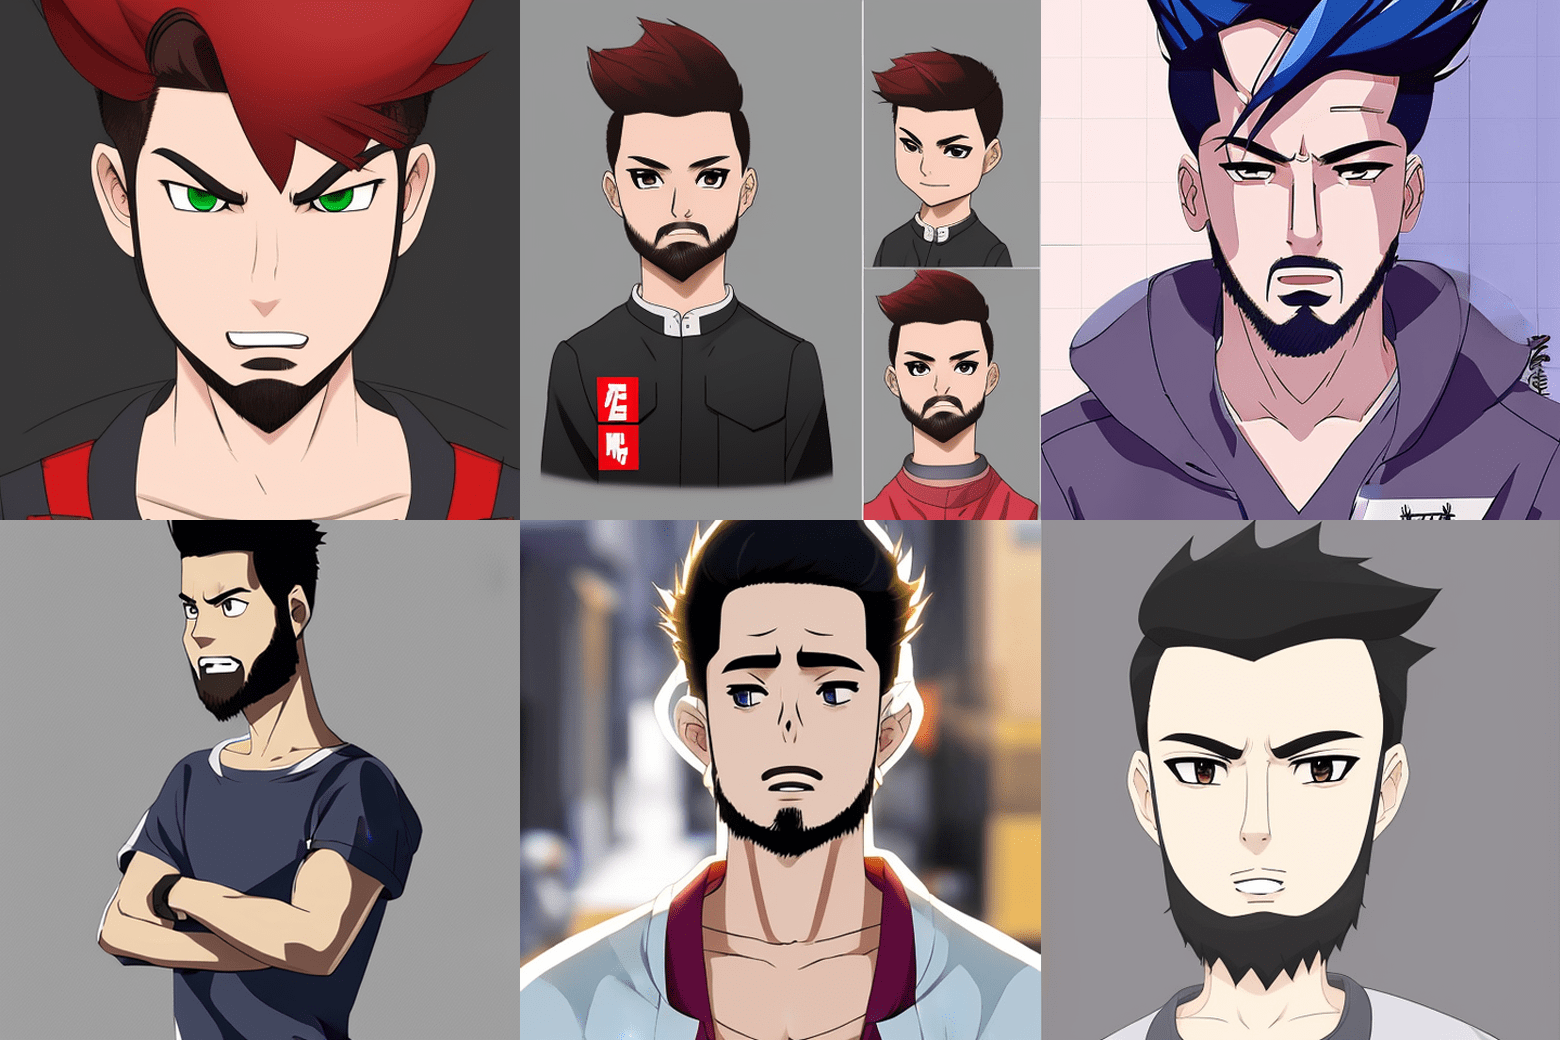 Six AI-generated images of the article’s author styled as various anime characters.